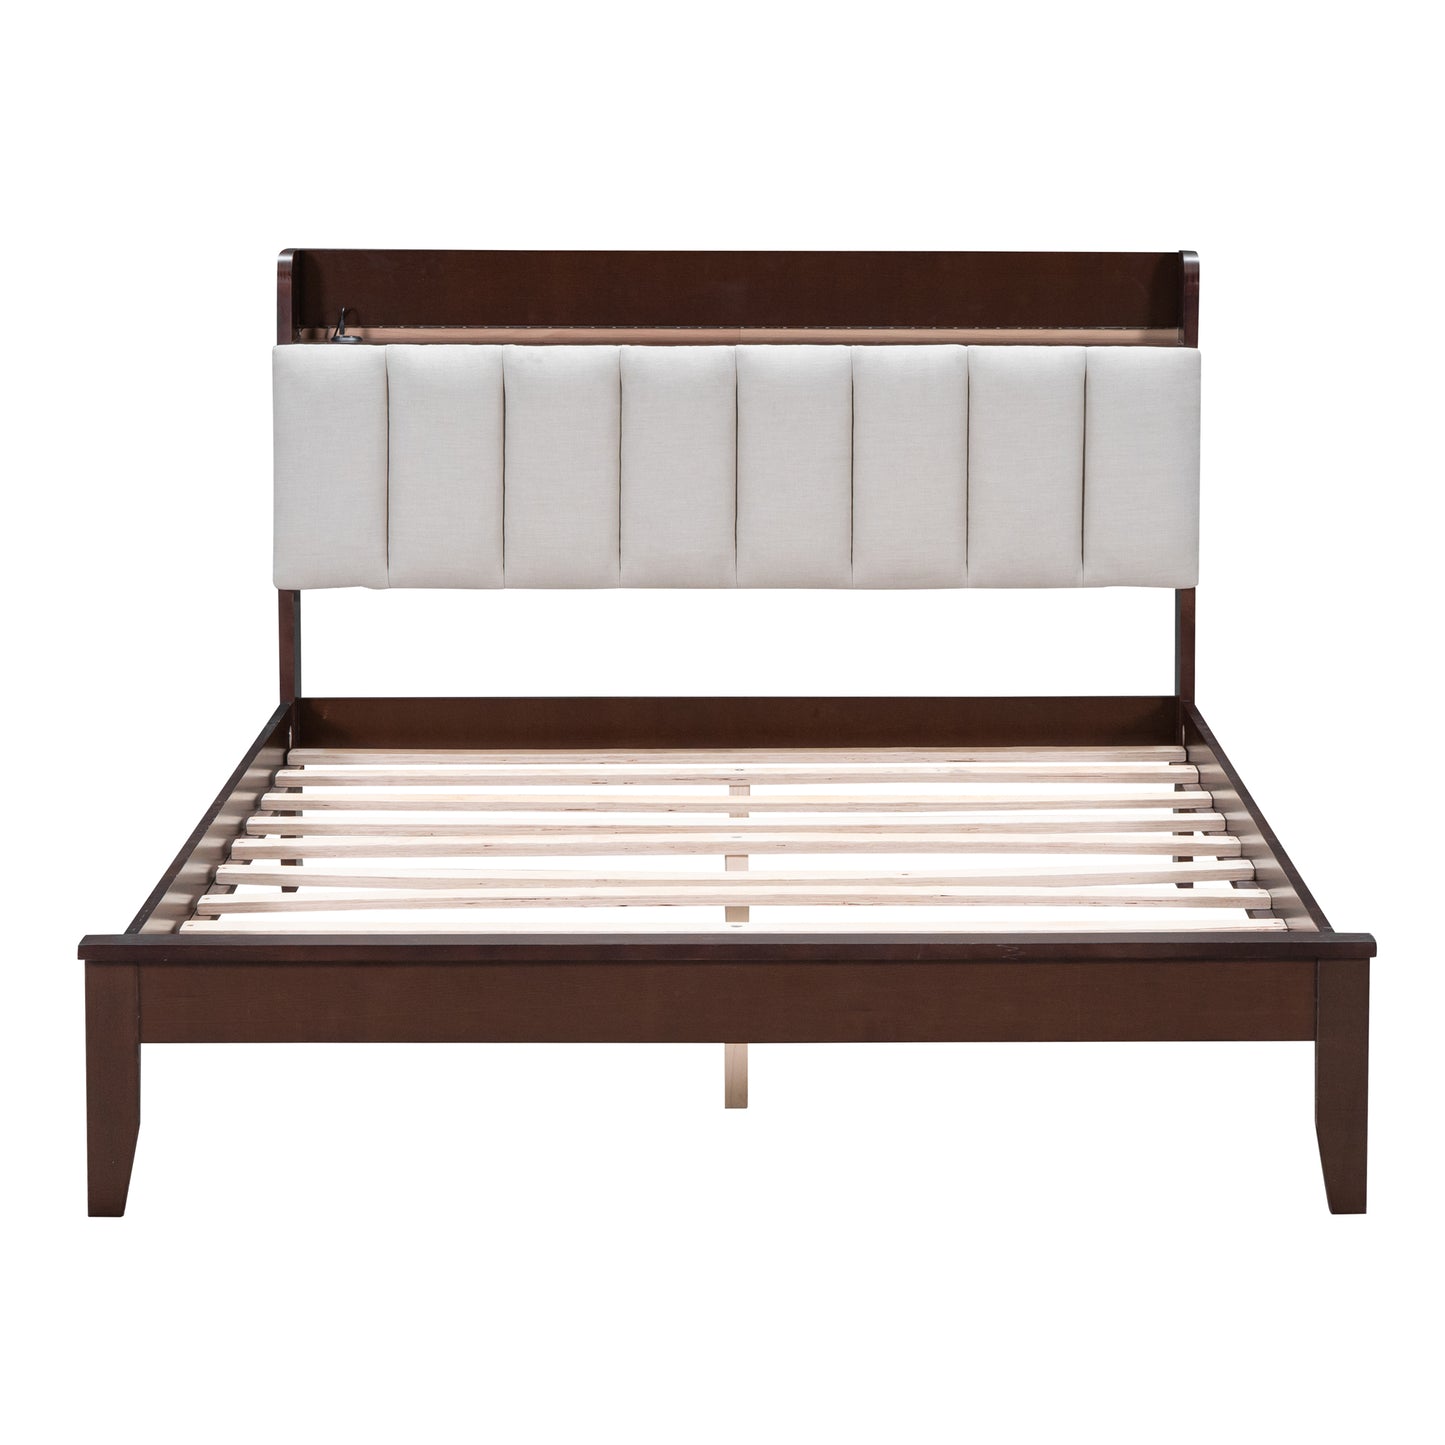 Full size Platform Bed with USB Charging Station and Storage Upholstered Headboard,LED Bed Frame,No Box Spring Needed,Walnut+Beige